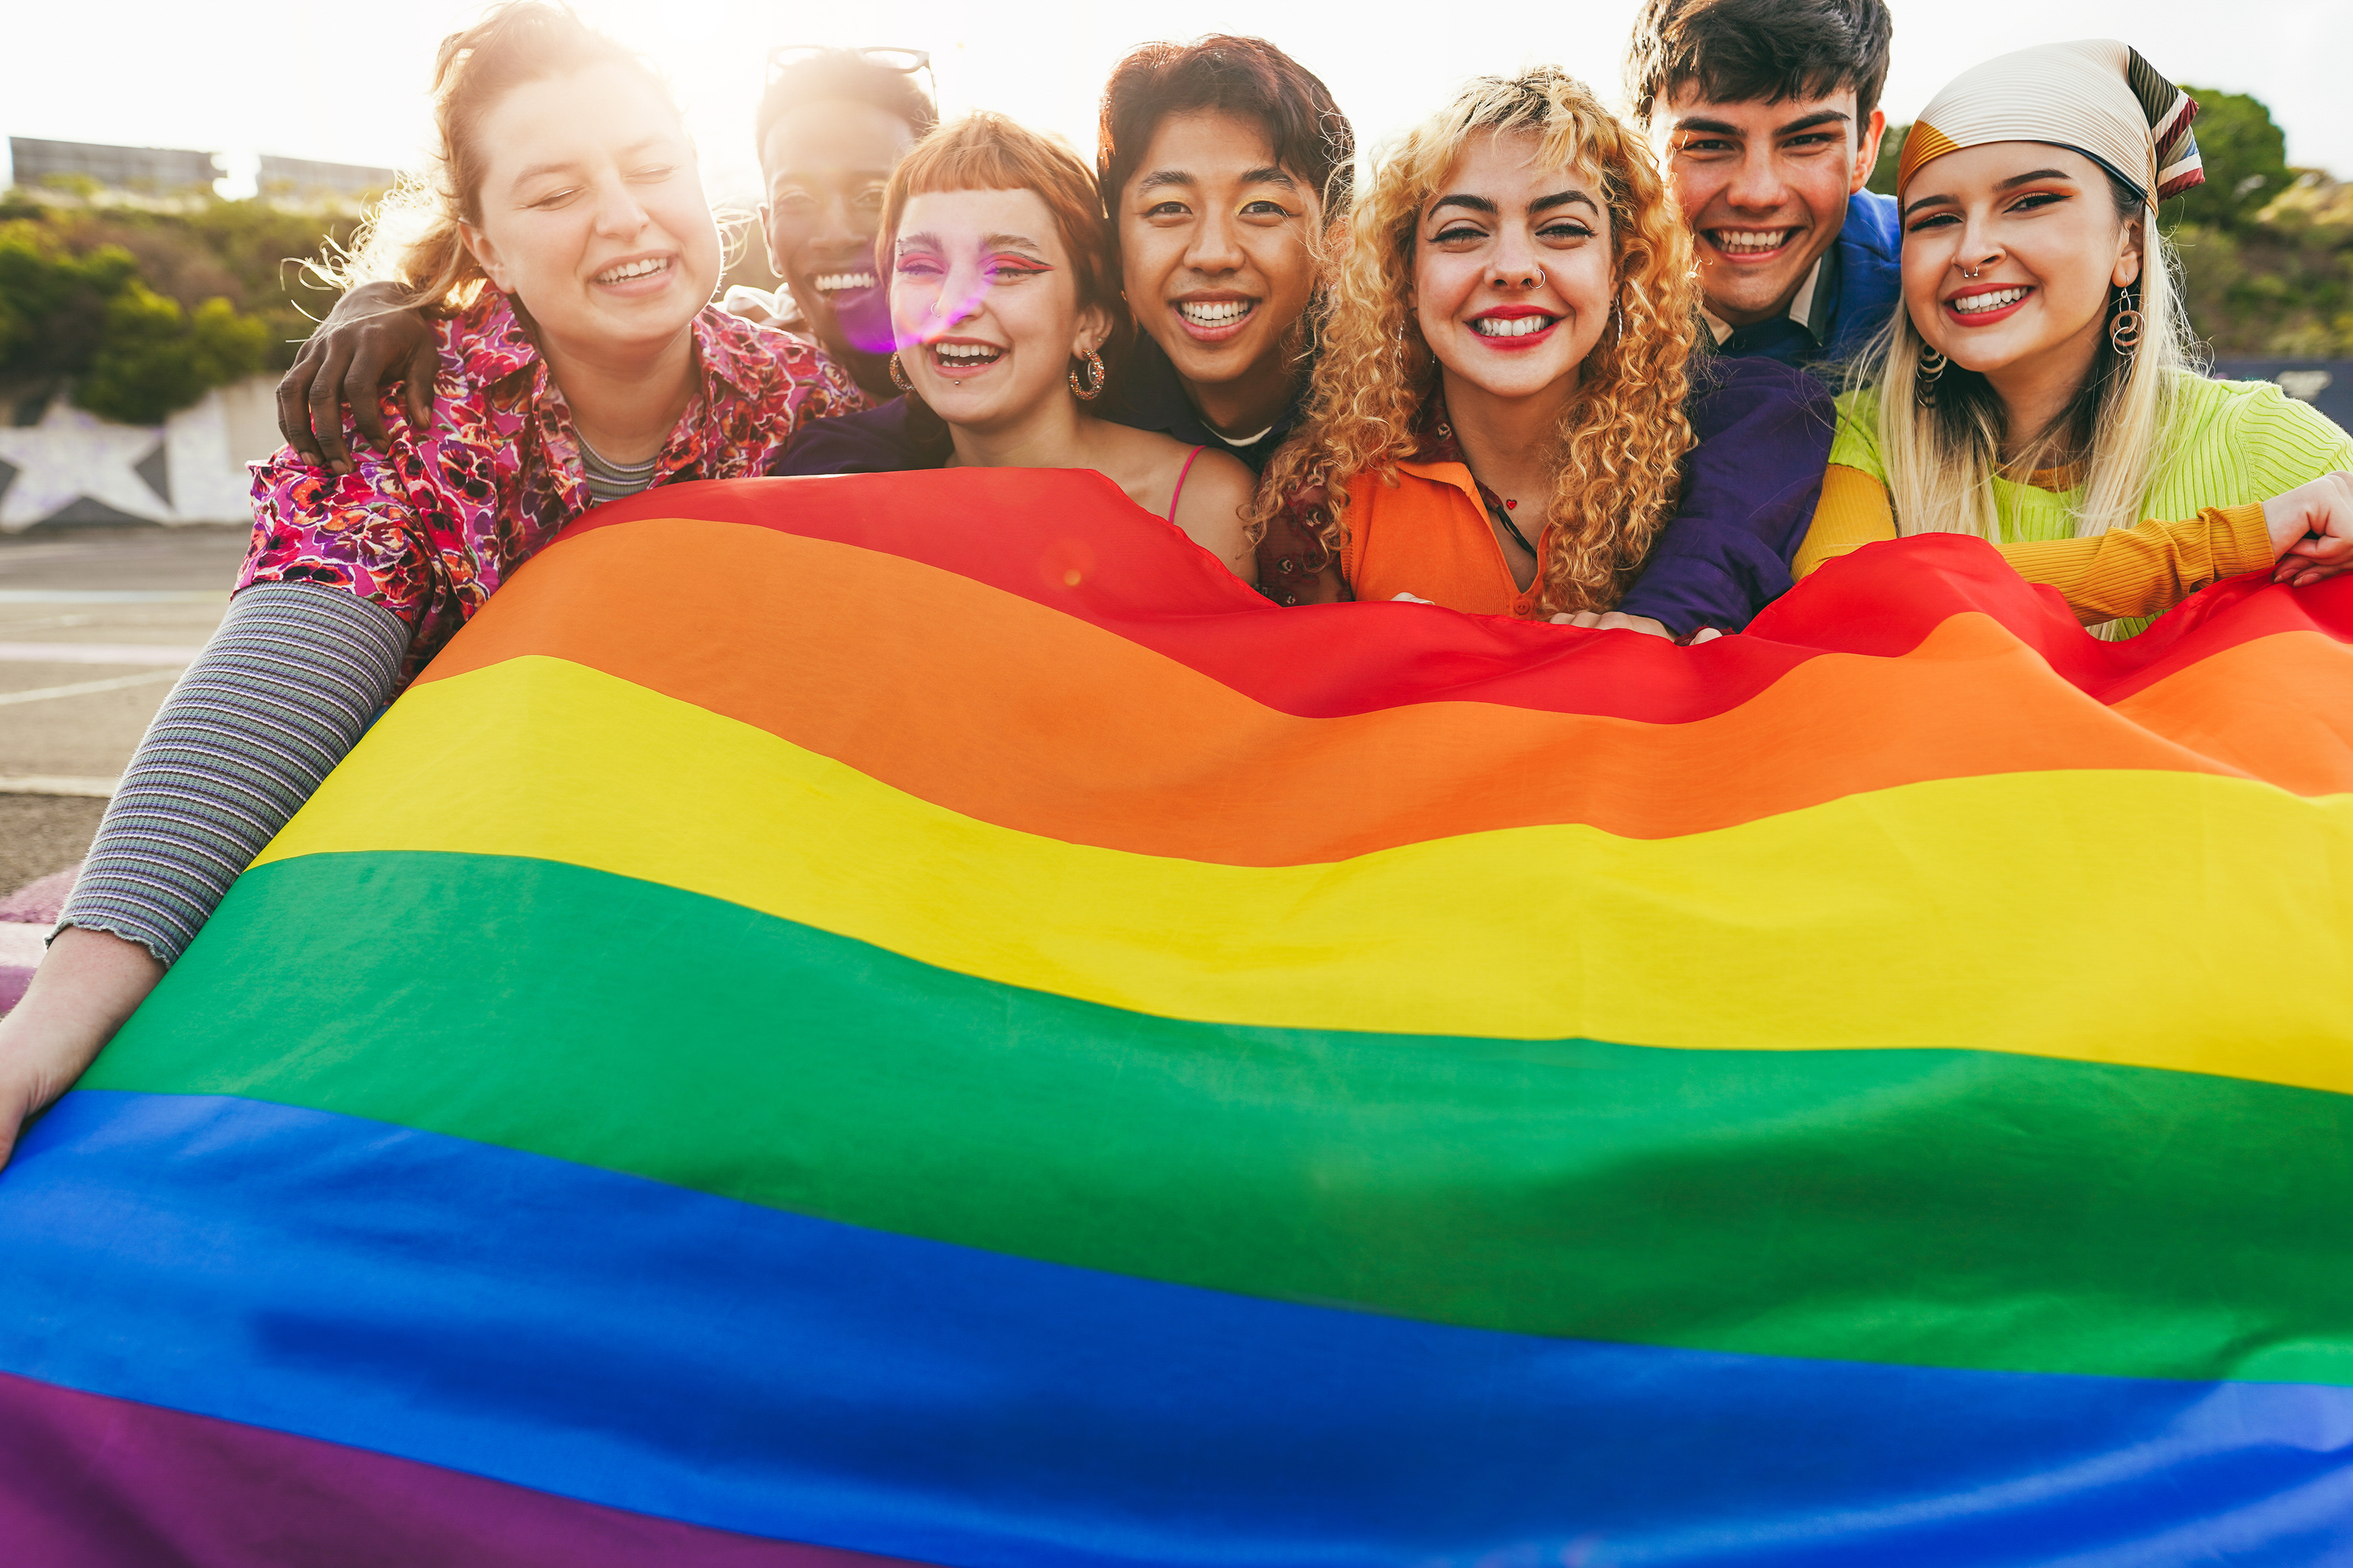  Images  Search by image or video Young diverse people having fun holding LGBT rainbow flag 